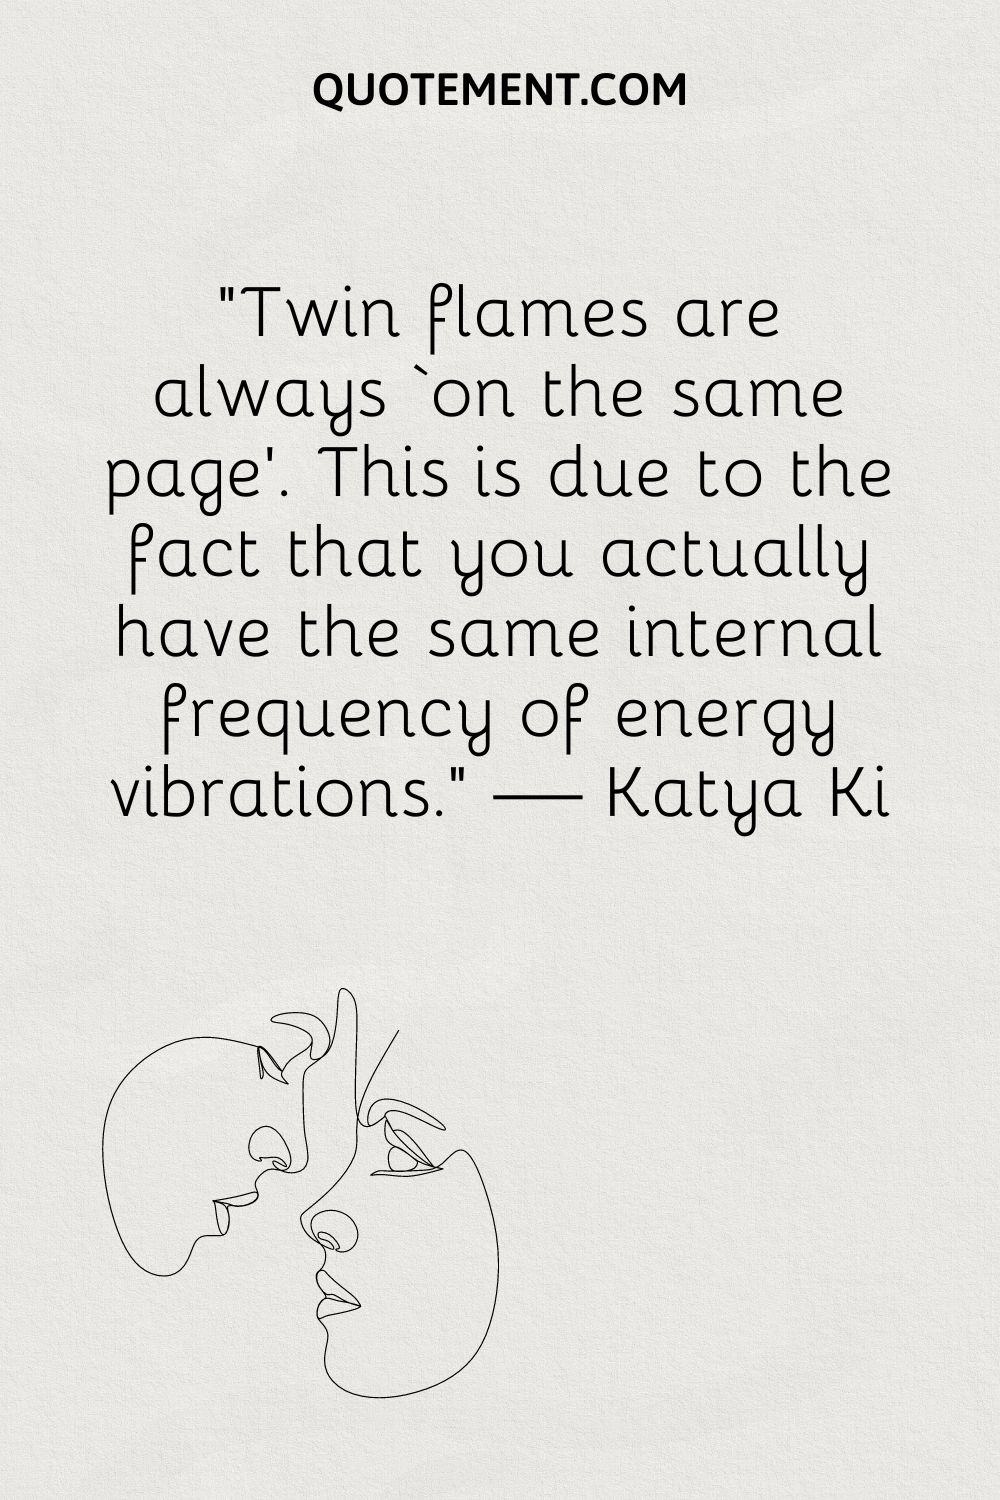 Twin flames are always ‘on the same page